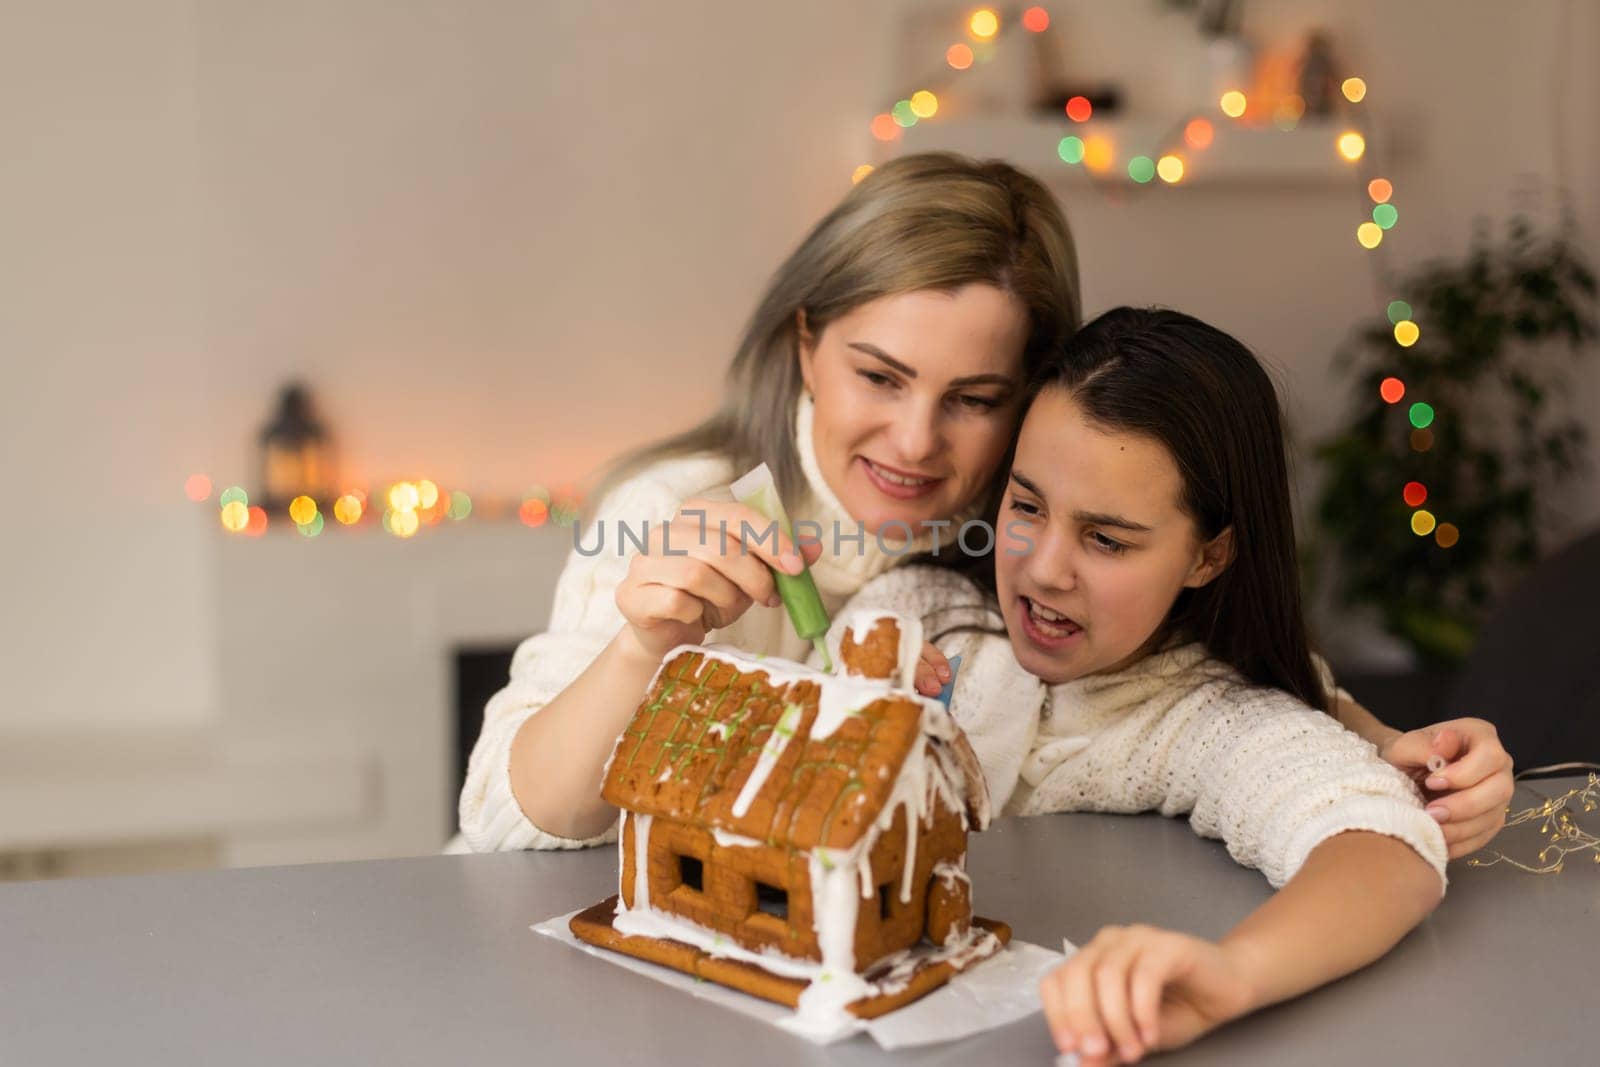 mother and daughter decorating gingerbread house. Beautiful living room with lights. Happy family celebrating holiday together